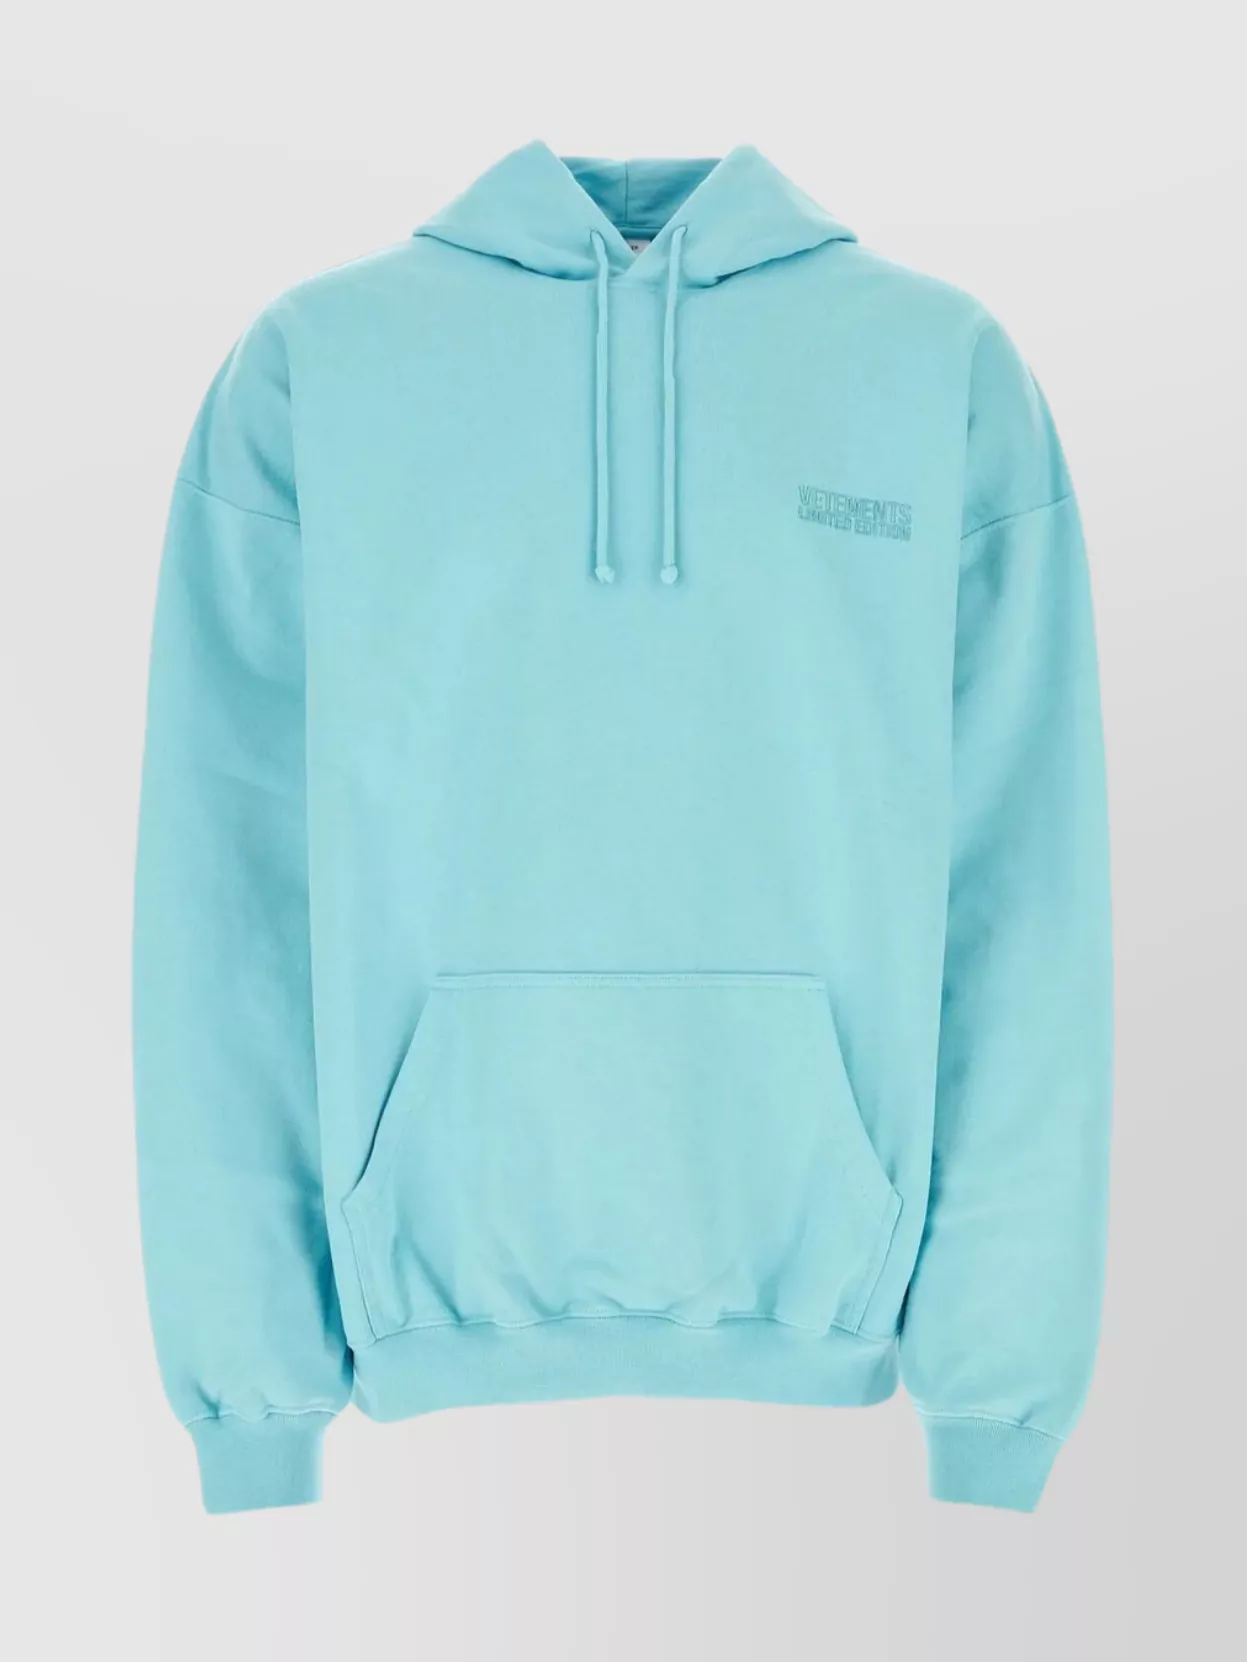 Vetements Cotton Blend Hooded Sweatshirt With Pouch Pocket In Blue